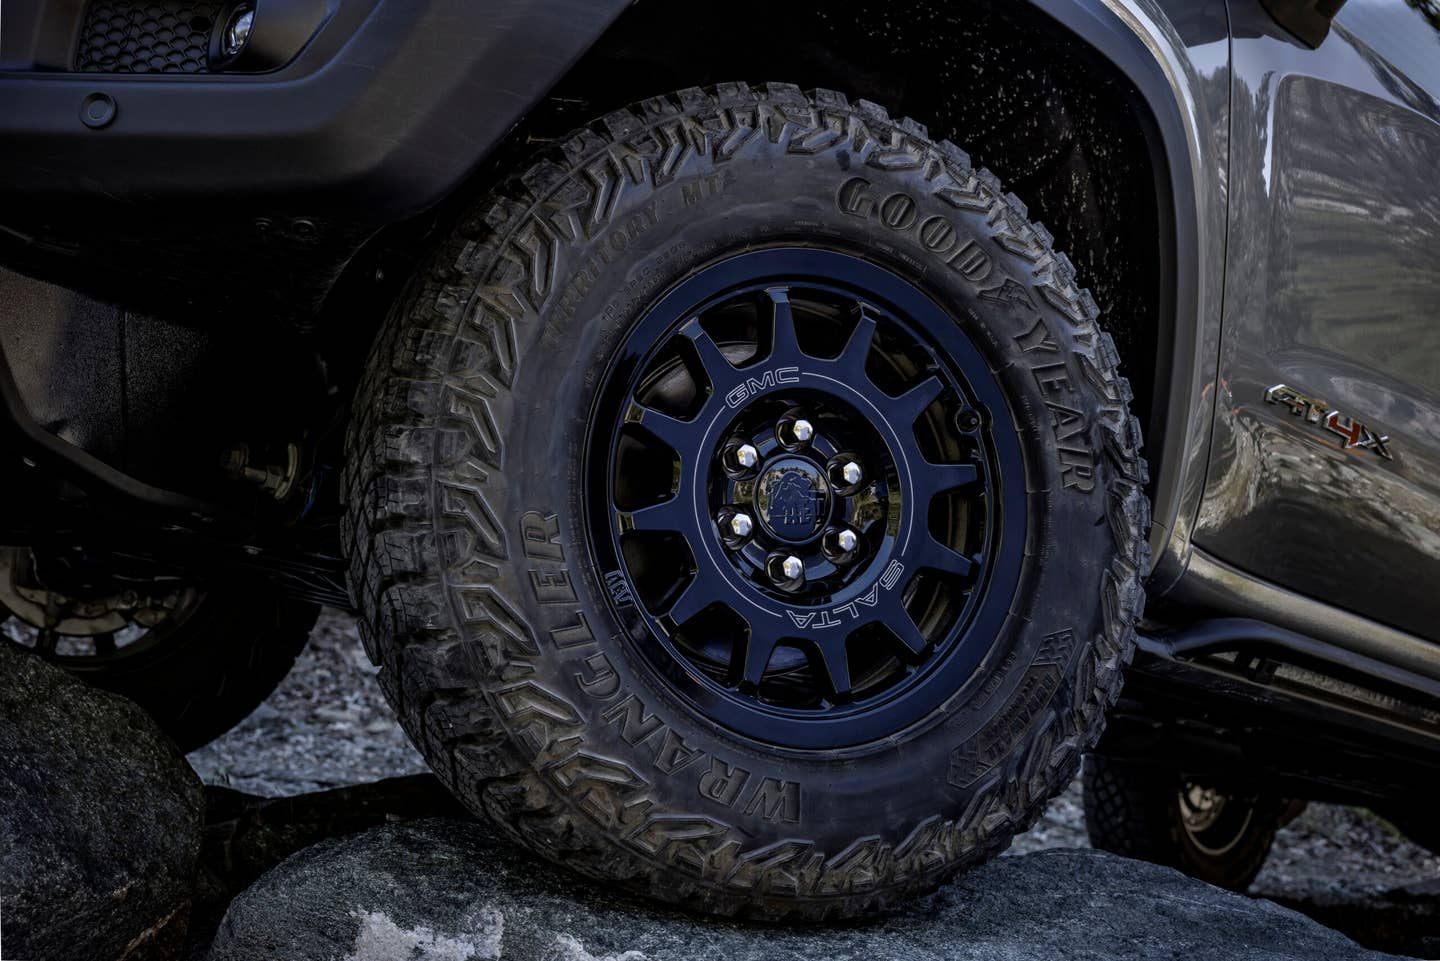 The 2023 GMC Sierra 1500 AT4X AEV Edition tackles off-road obstacles. The AEV Edition features 18-inch AEV Salta wheels with recessed valves for added protection on the trail and 33-inch Goodyear Wrangler Territory MT tires.